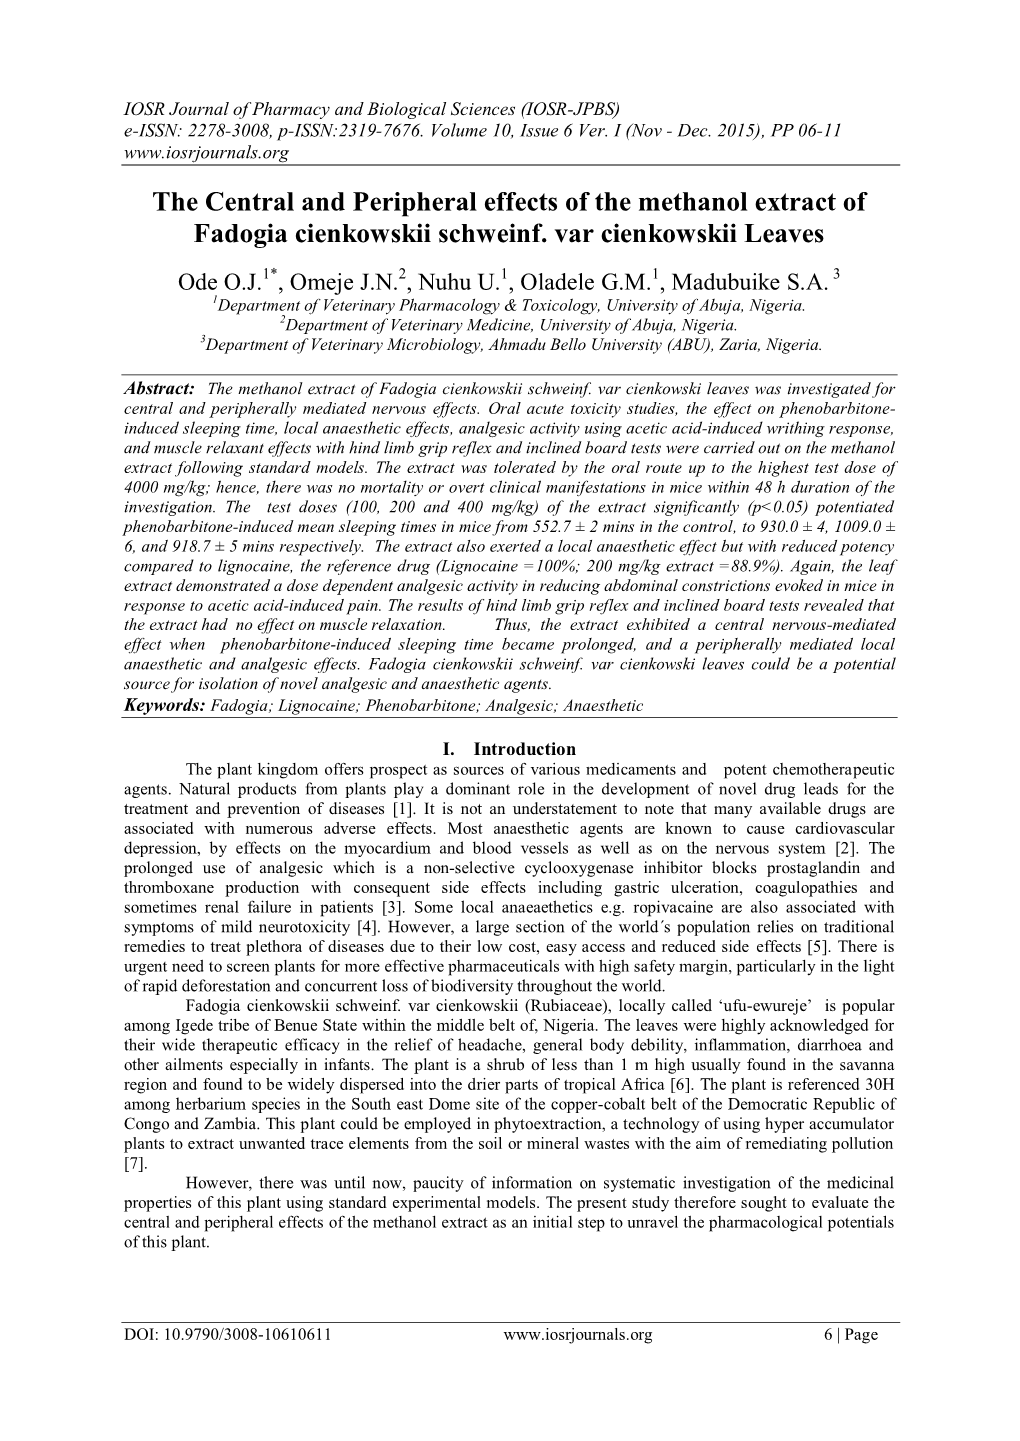 The Central and Peripheral Effects of the Methanol Extract of Fadogia Cienkowskii Schweinf